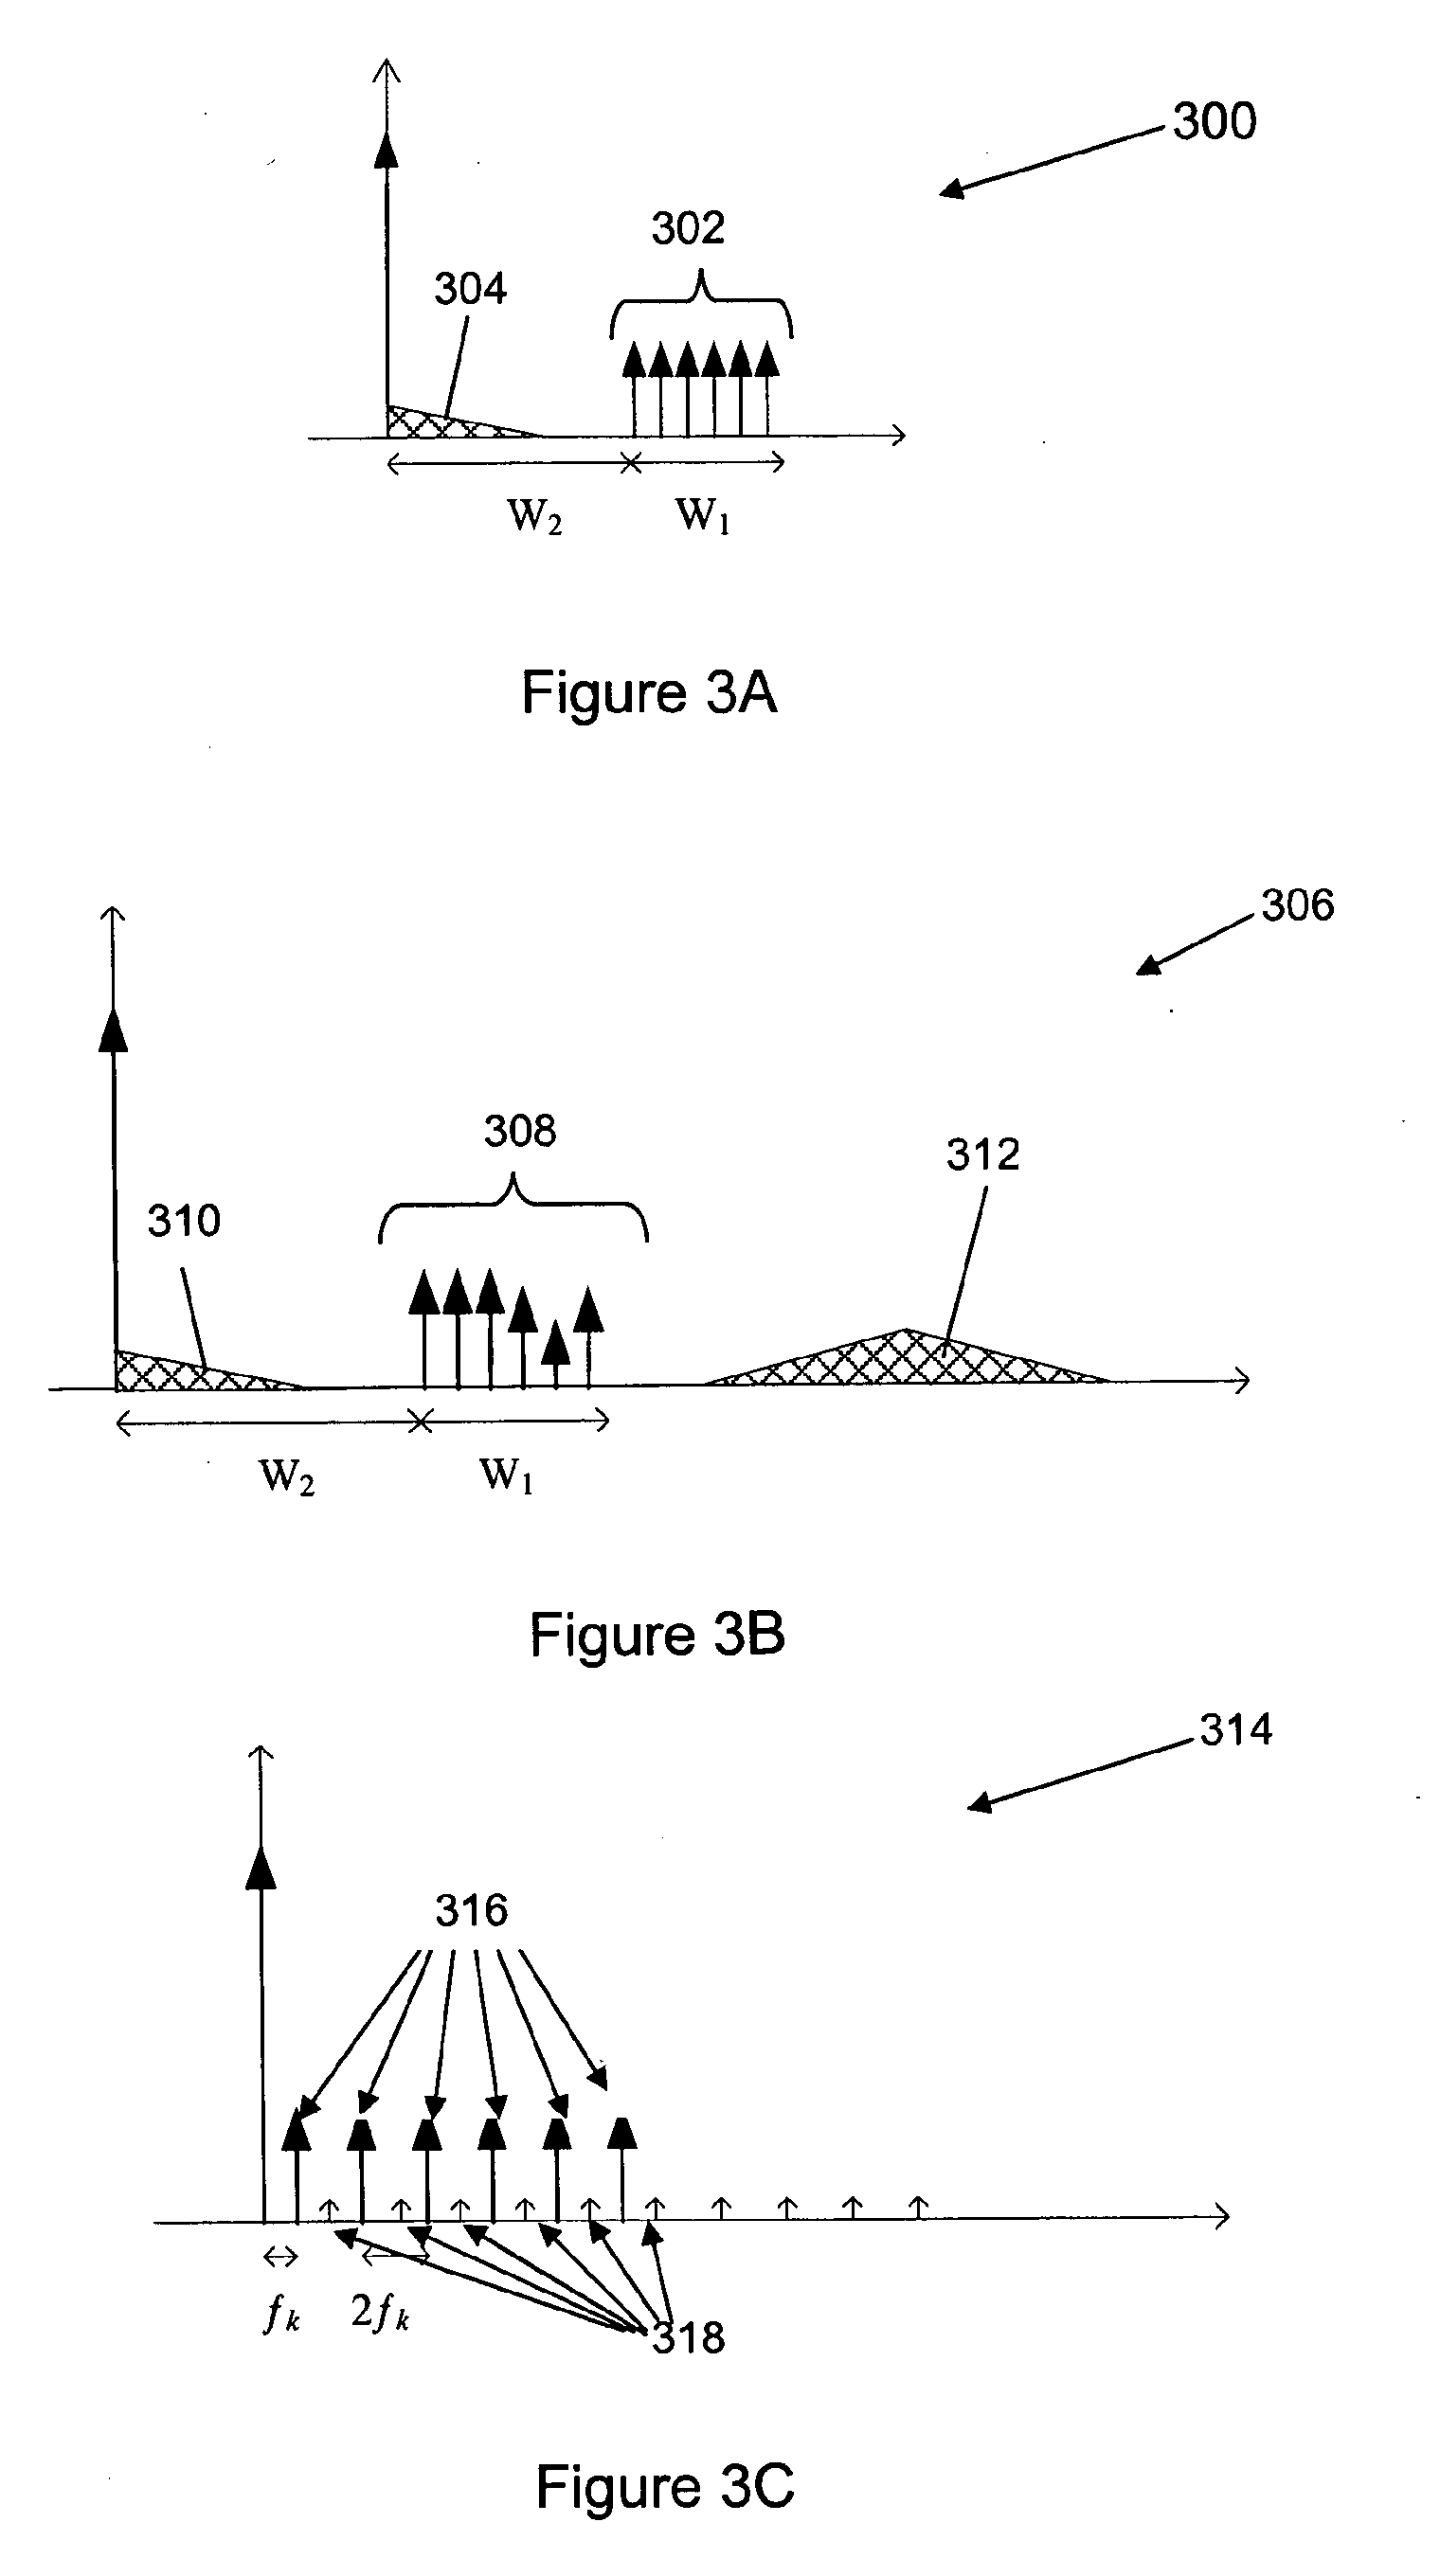 Methods and apparatus for generation and transmission of optical signals